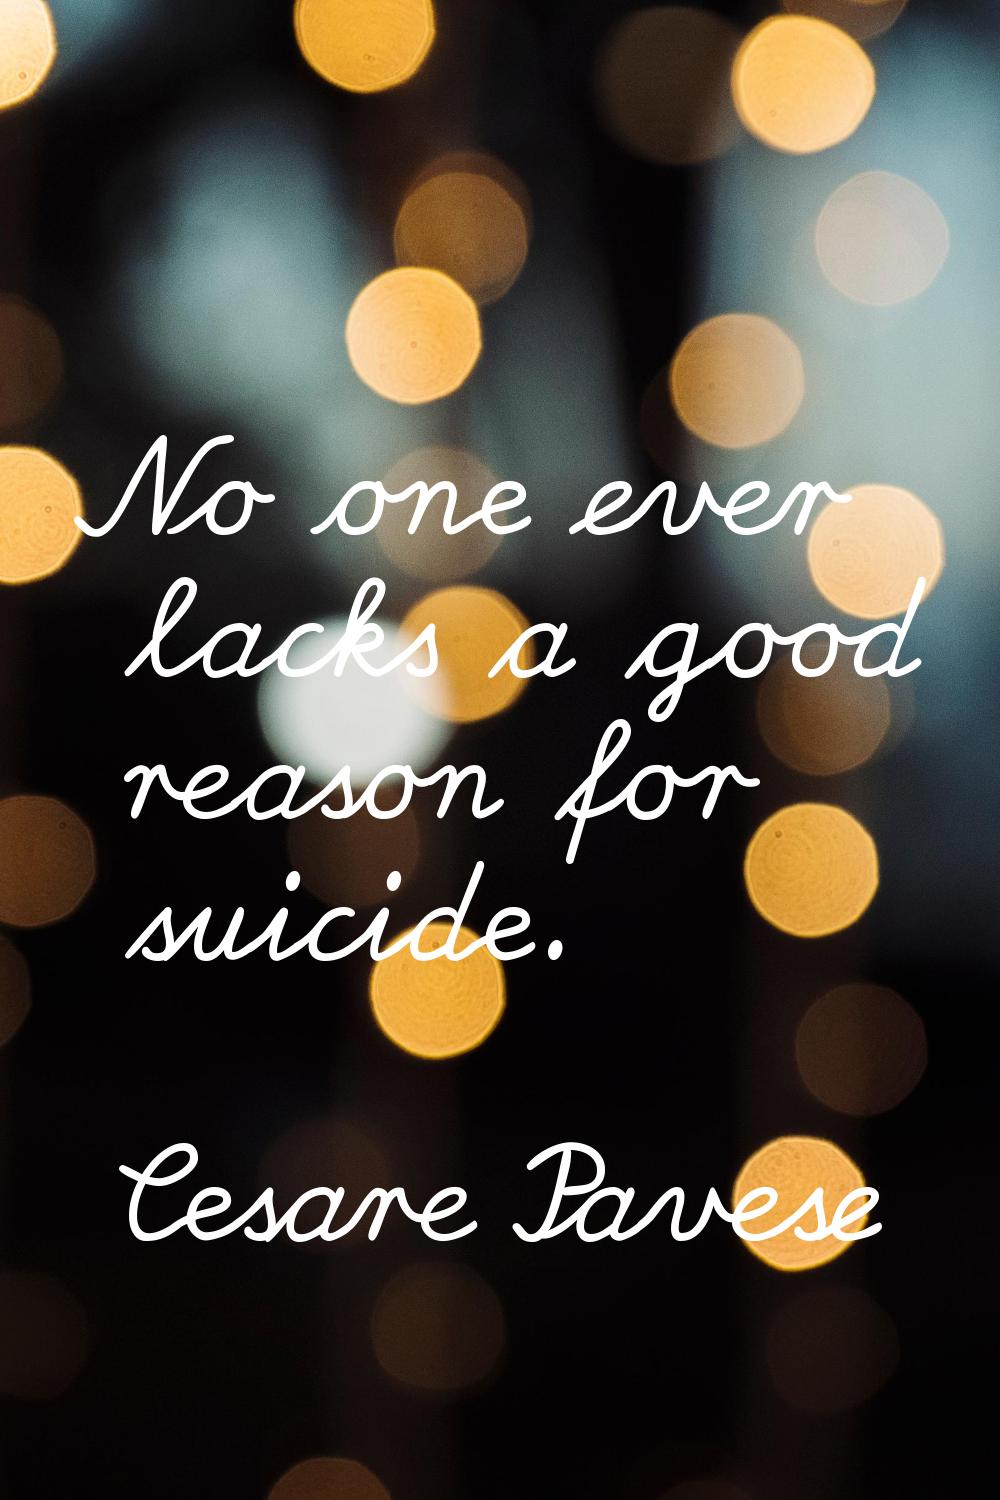 No one ever lacks a good reason for suicide.